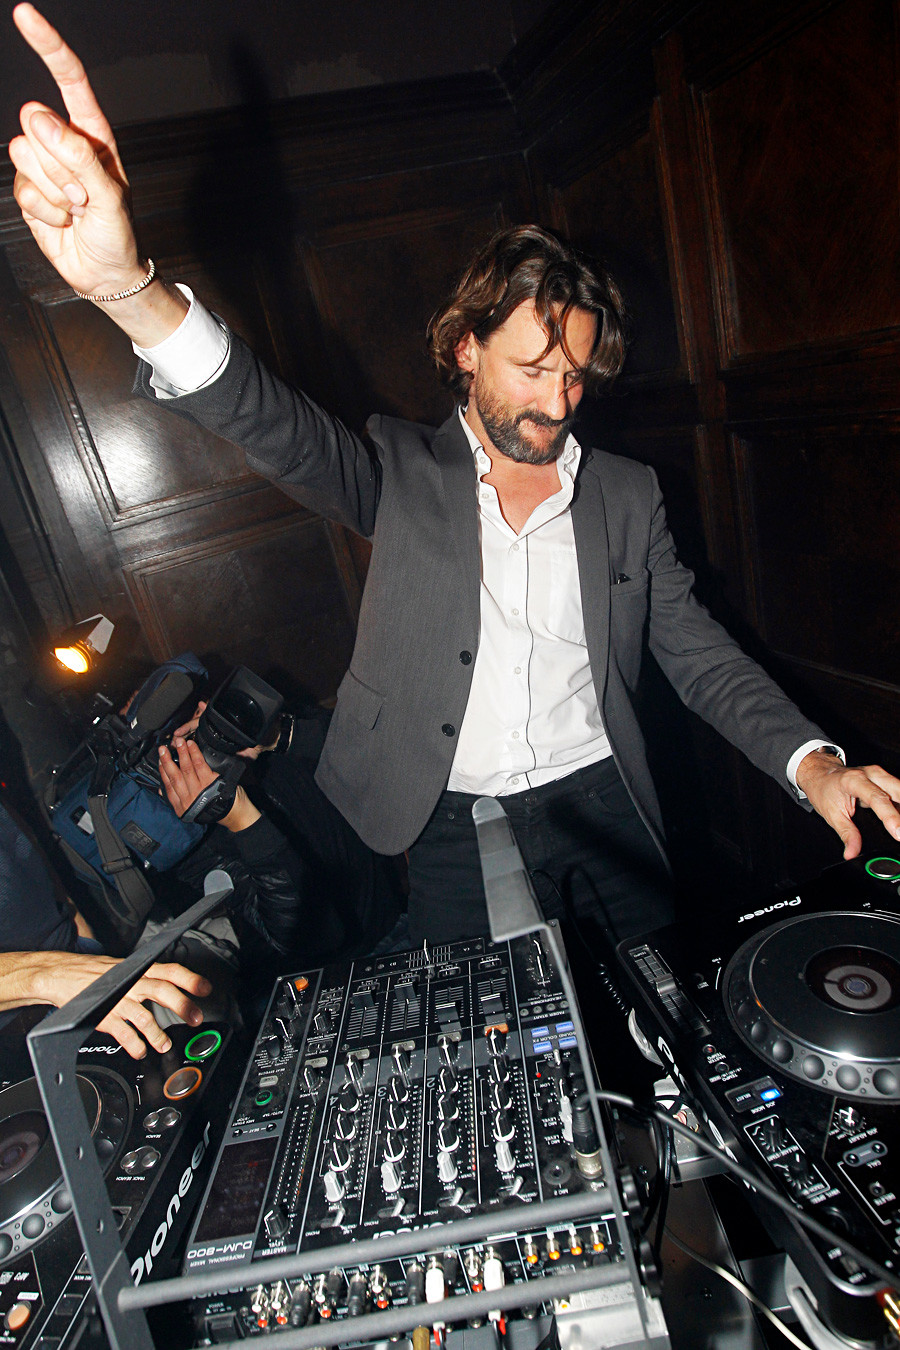 French writer Frederic Beigbeder playing his DJ-set at the Marusya restaurant in Moscow. 